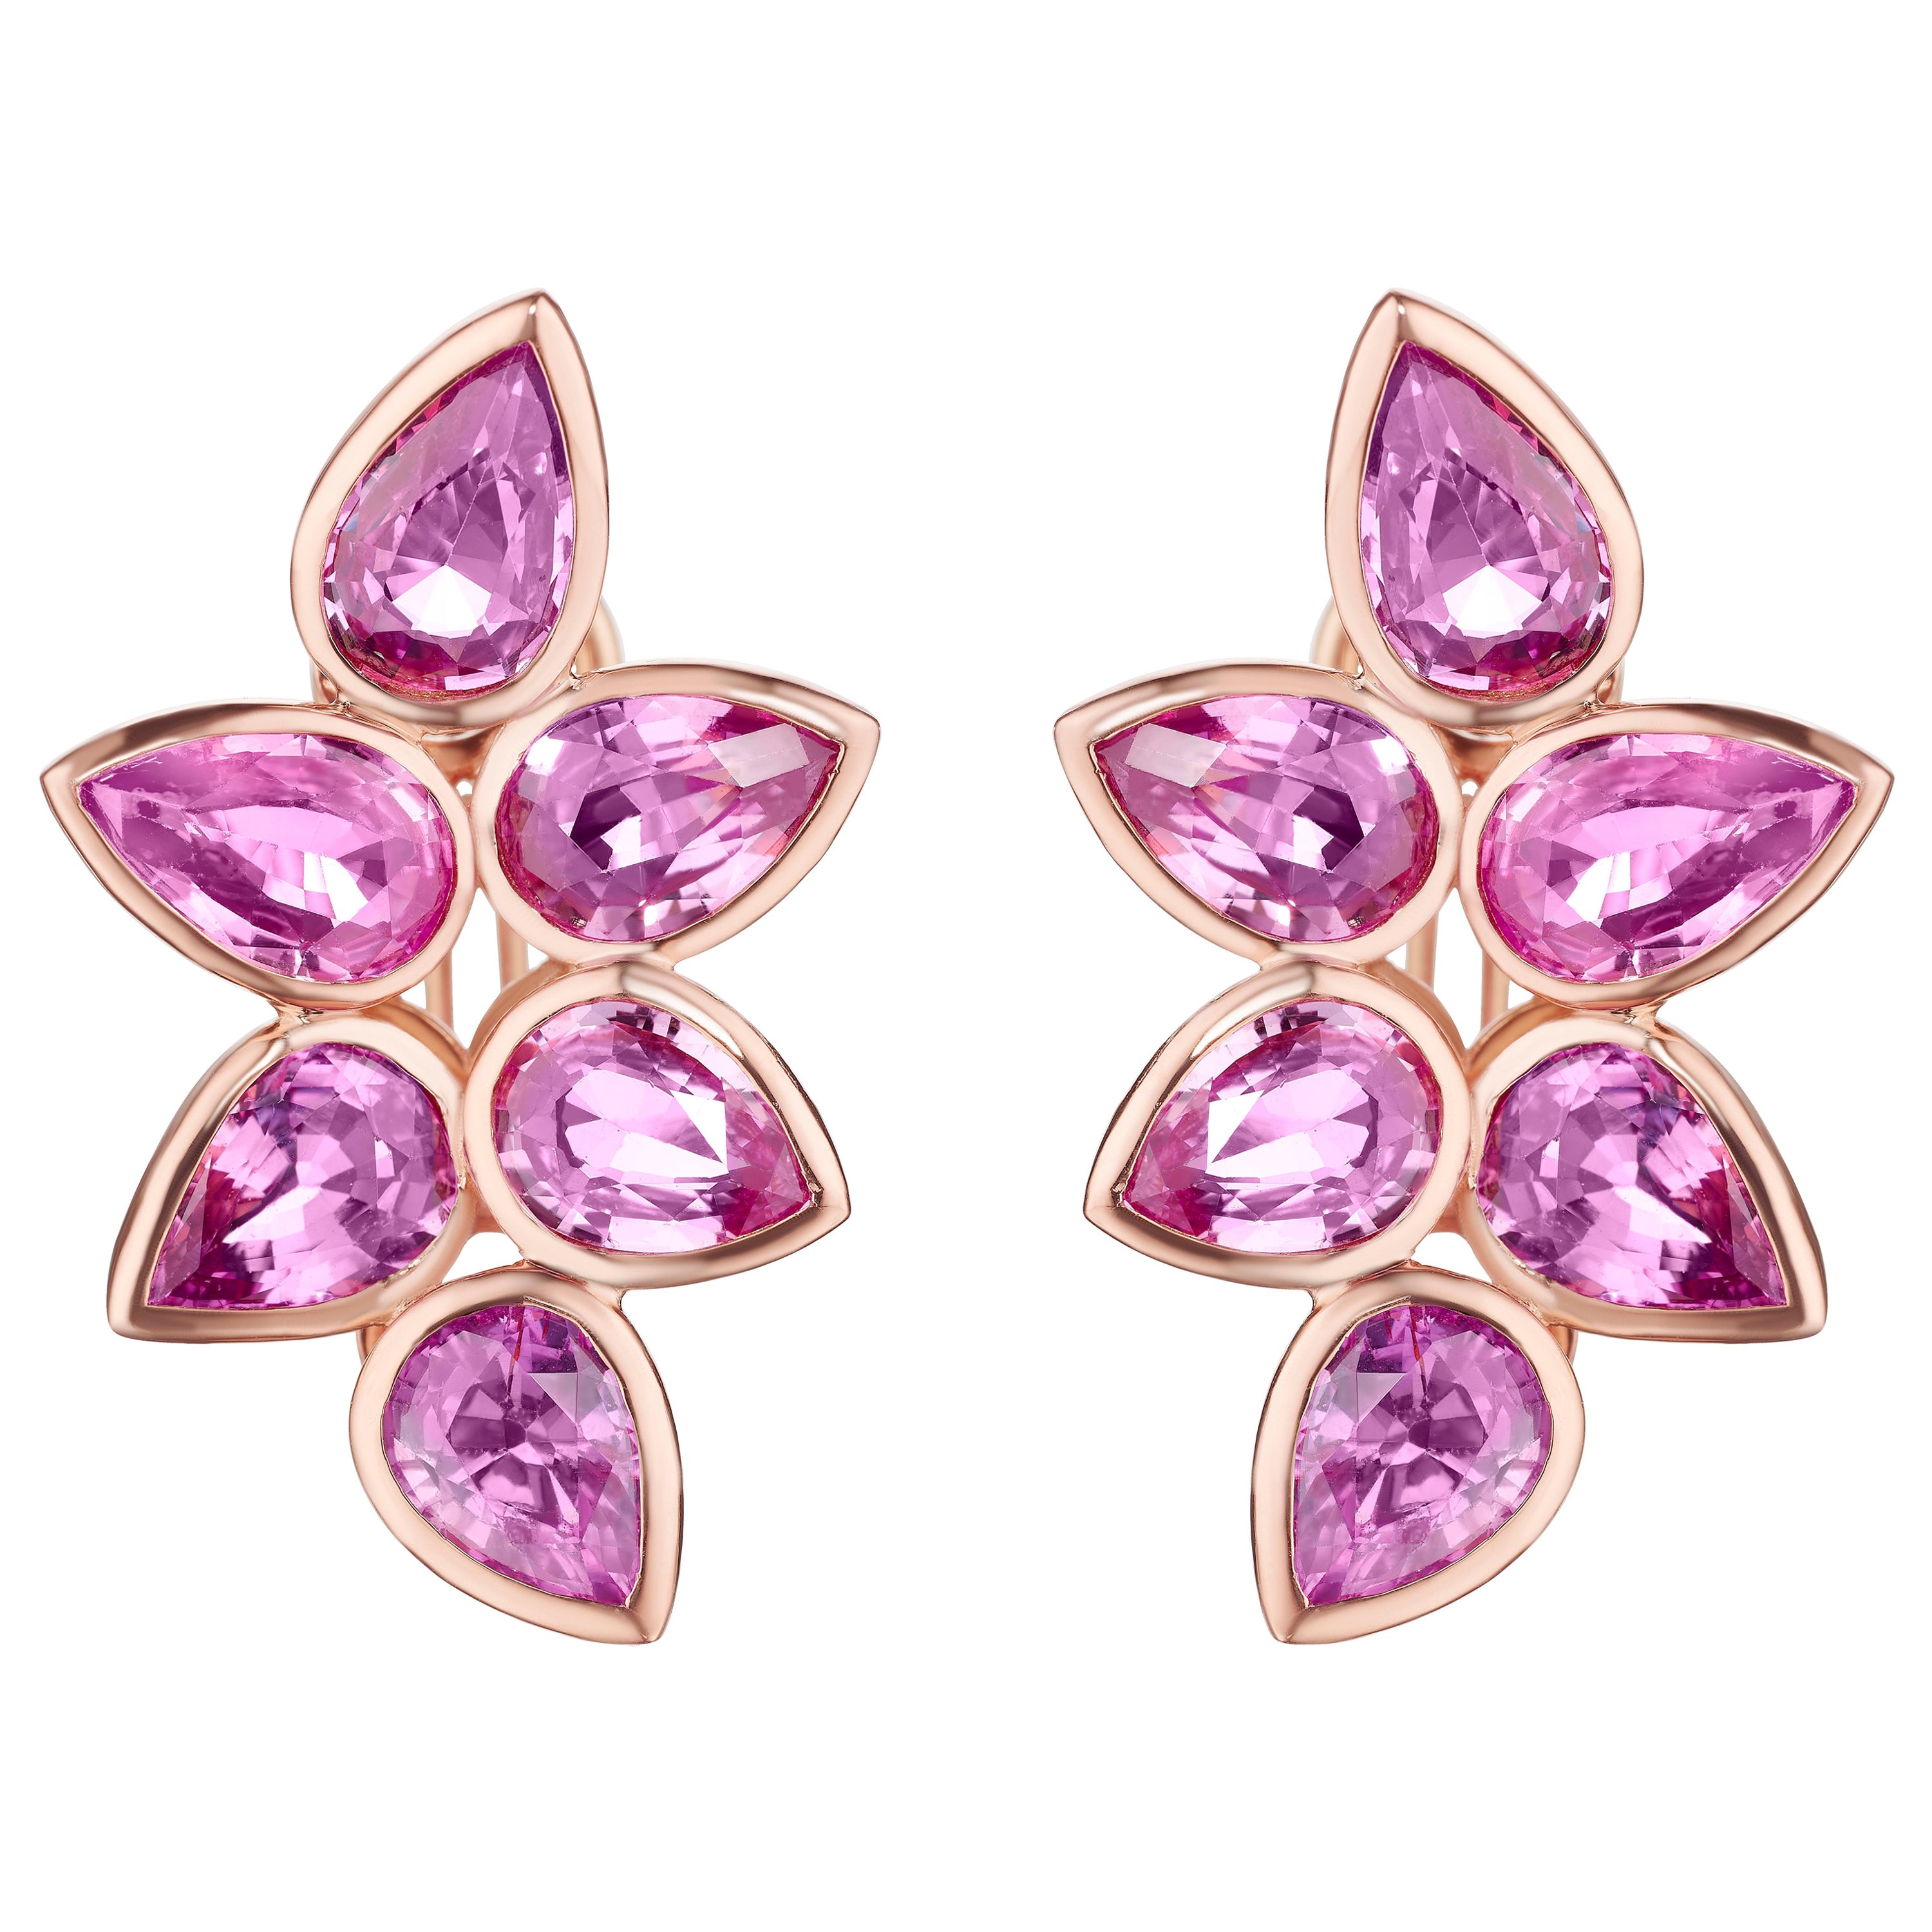 15.52 Carats Pear Shaped Pink Sapphires Cluster Earrings For Sale